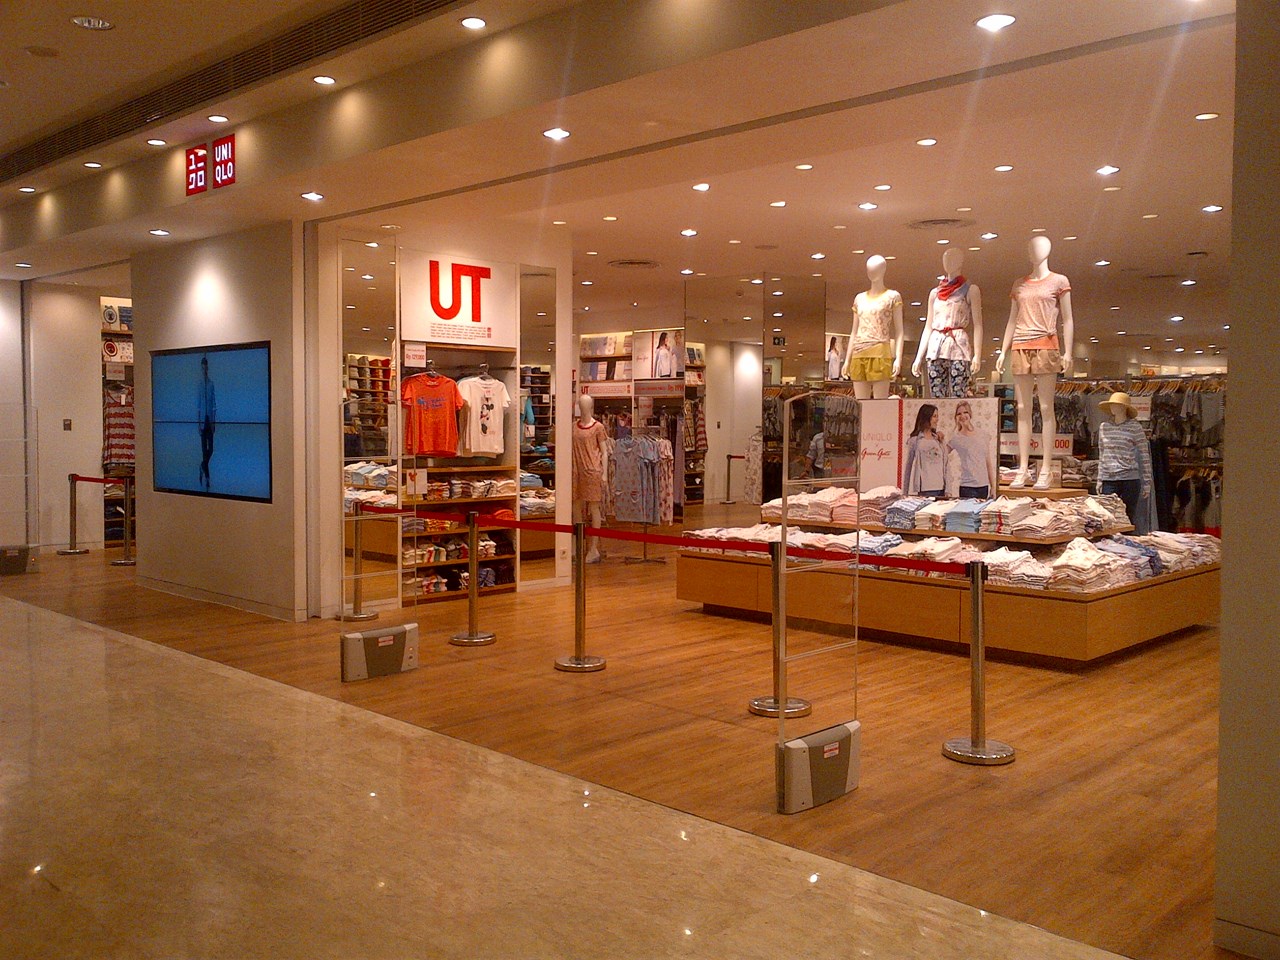 http://www.shintoko.jp/engblog/archives/images/2013/06/130625_uniqloopen-02652.jpg